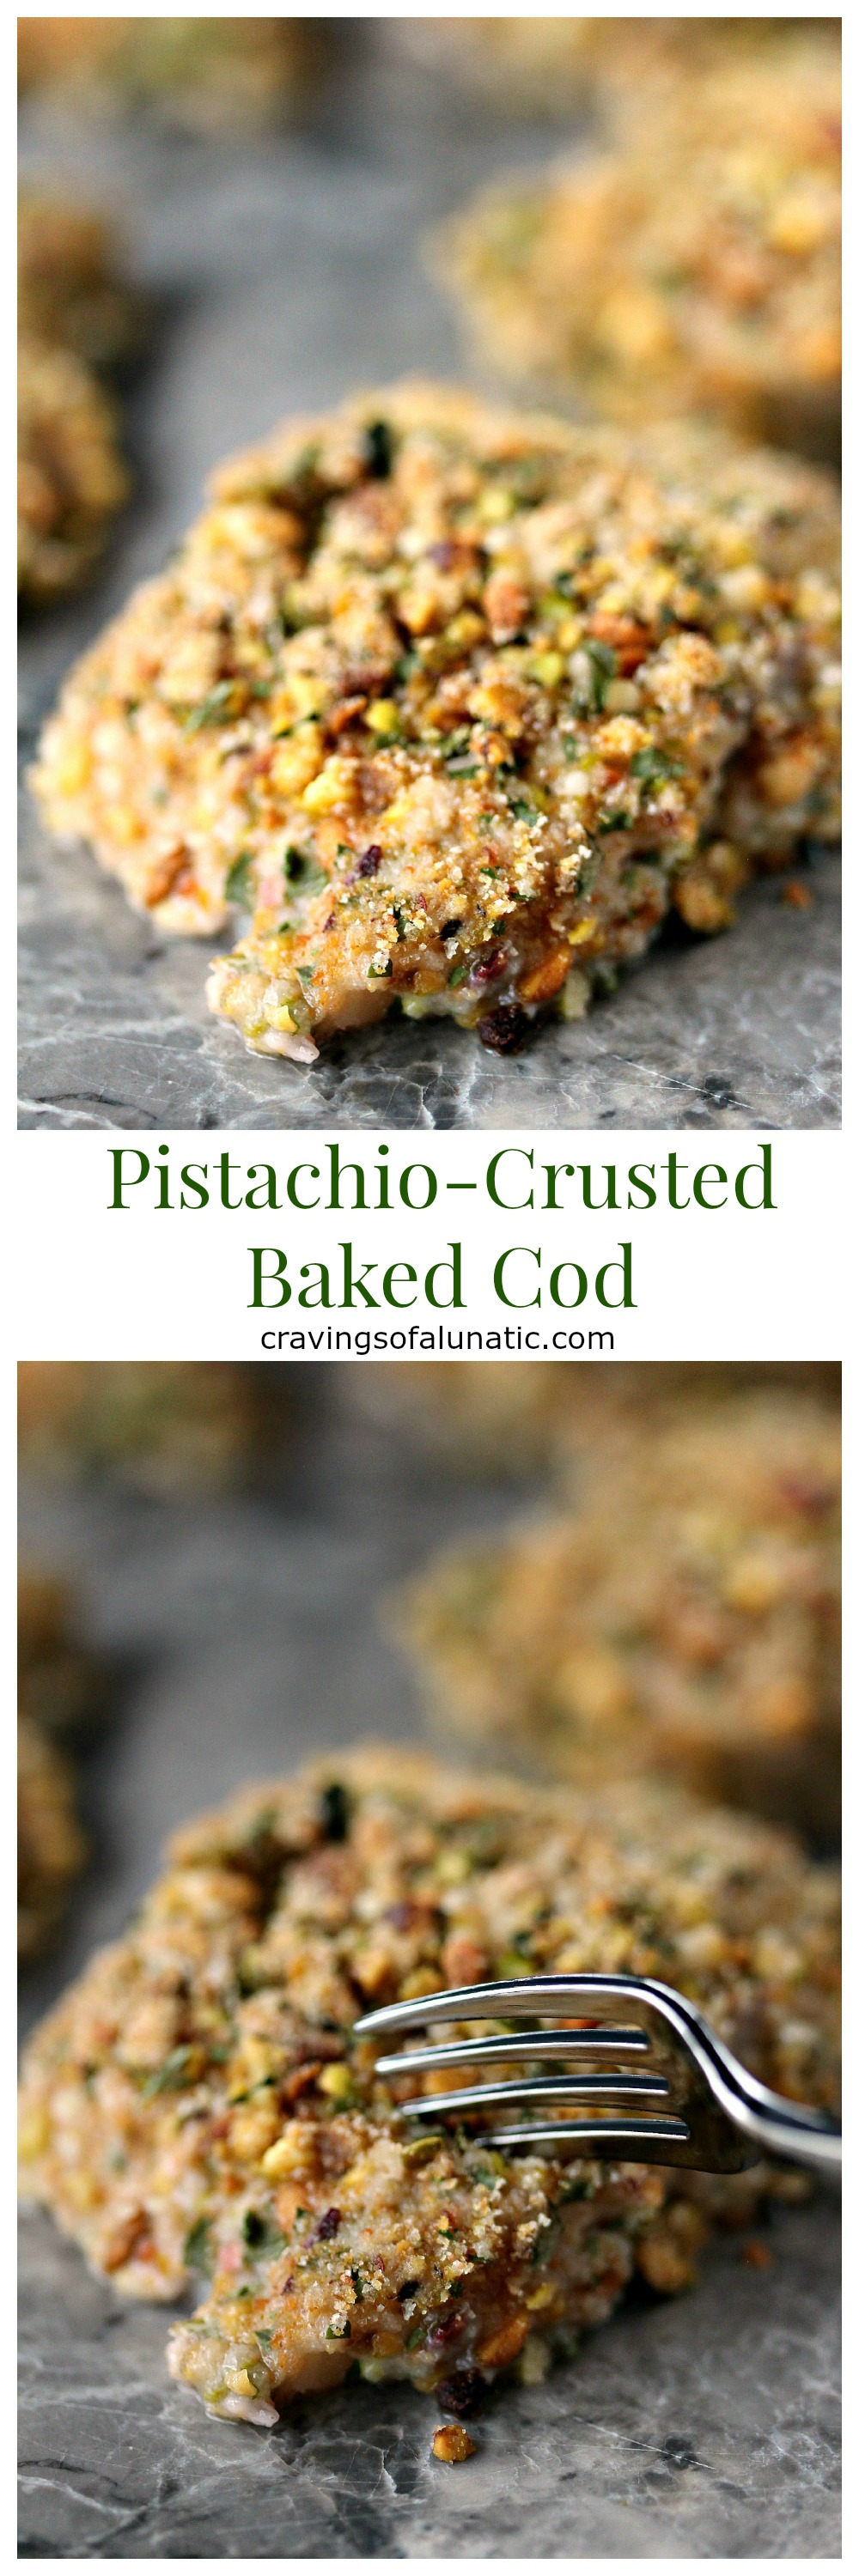 Pistachio Crusted Baked Cod from cravingsofalunatic.com- This Pistachio Crusted Baked Cod Recipe is part of our Feast of the Seven Fishes event. It's incredibly quick and easy to make. The cod is coated with yogurt, then coated with a pistachio mixture and cooked to perfection! (@CravingsLunatic)